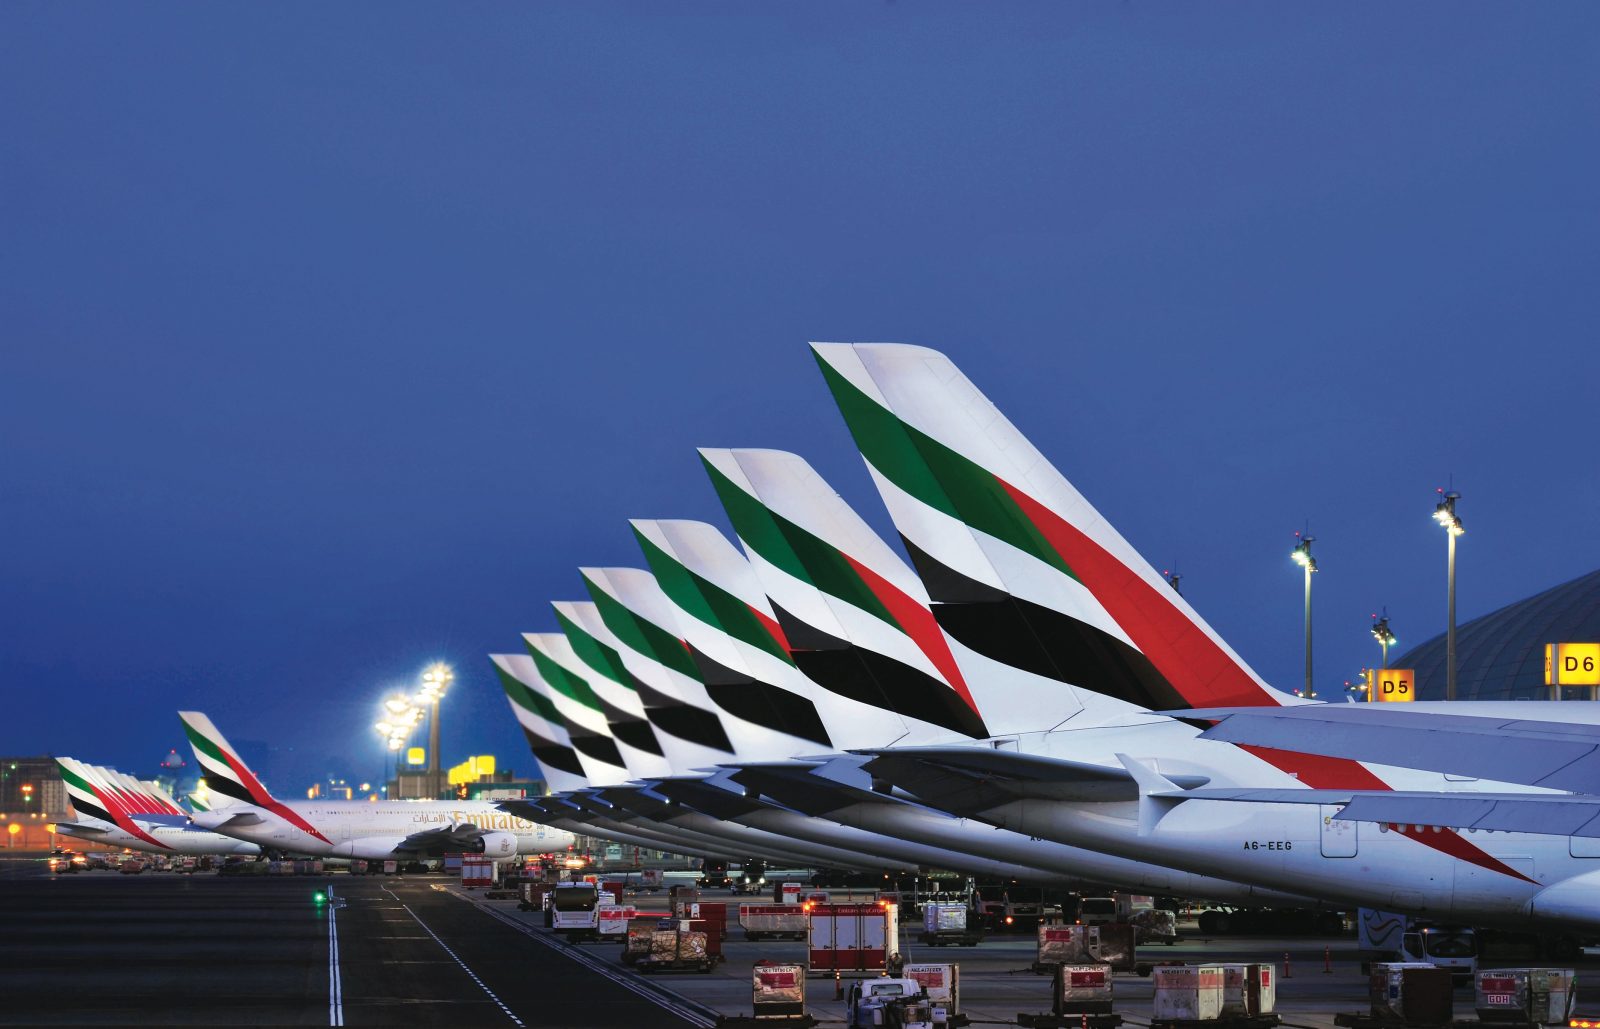 Emirates Cabin Crew Are To Receive A Welcome Pay Raise After Profits Jump 67% In One Year